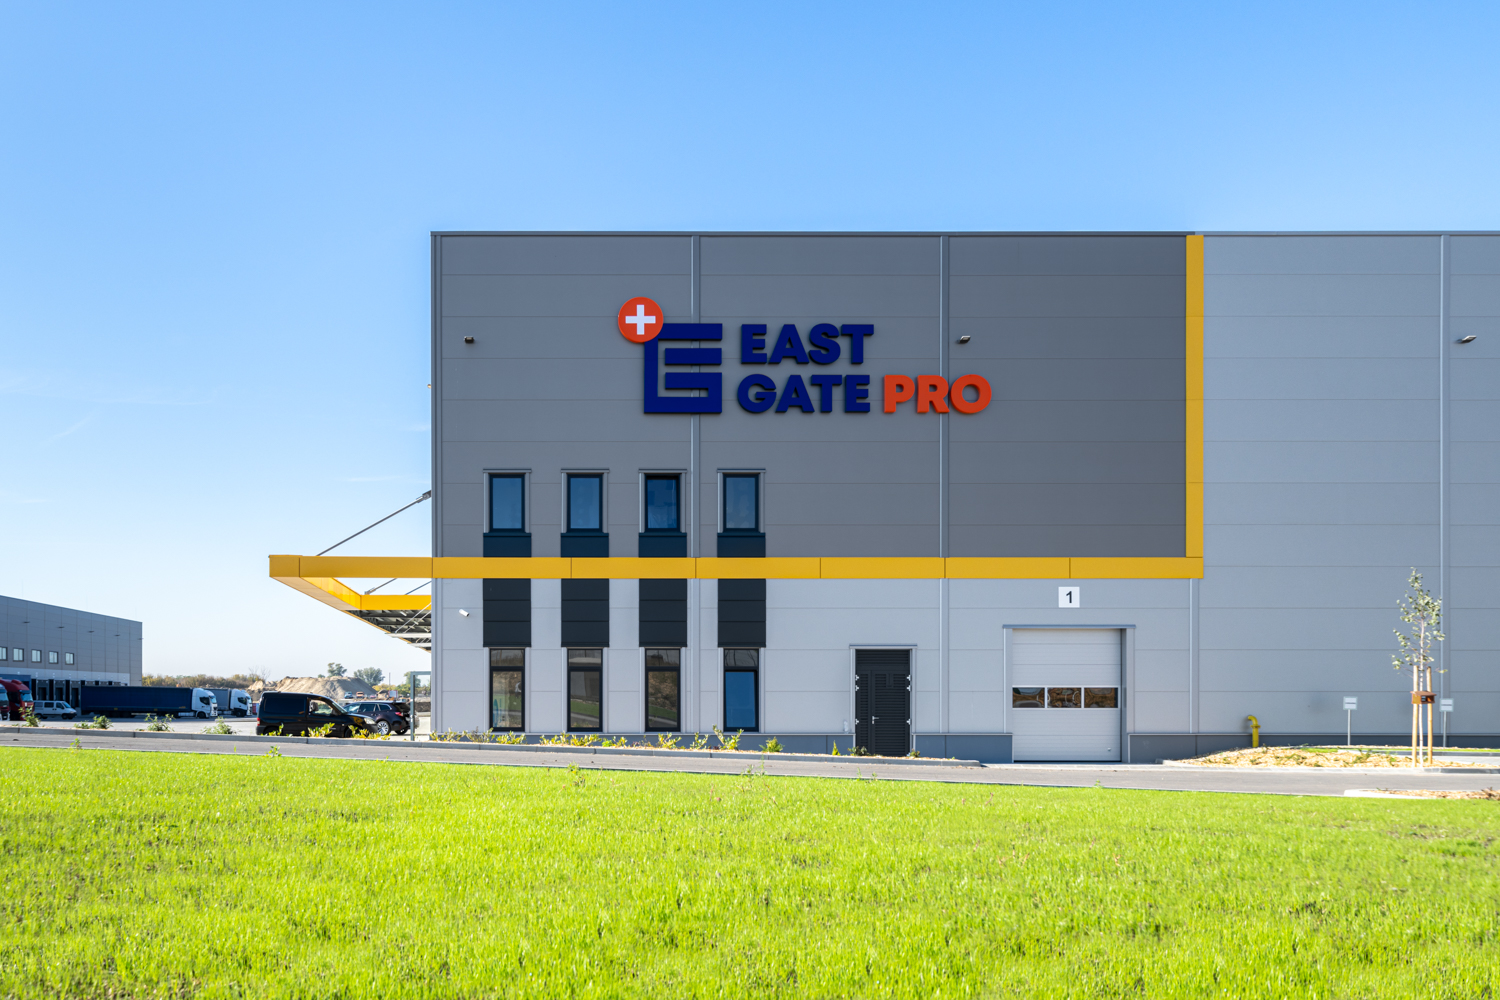 The first phase of WING’s East Gate Pro Business Park development receives BREEAM certification